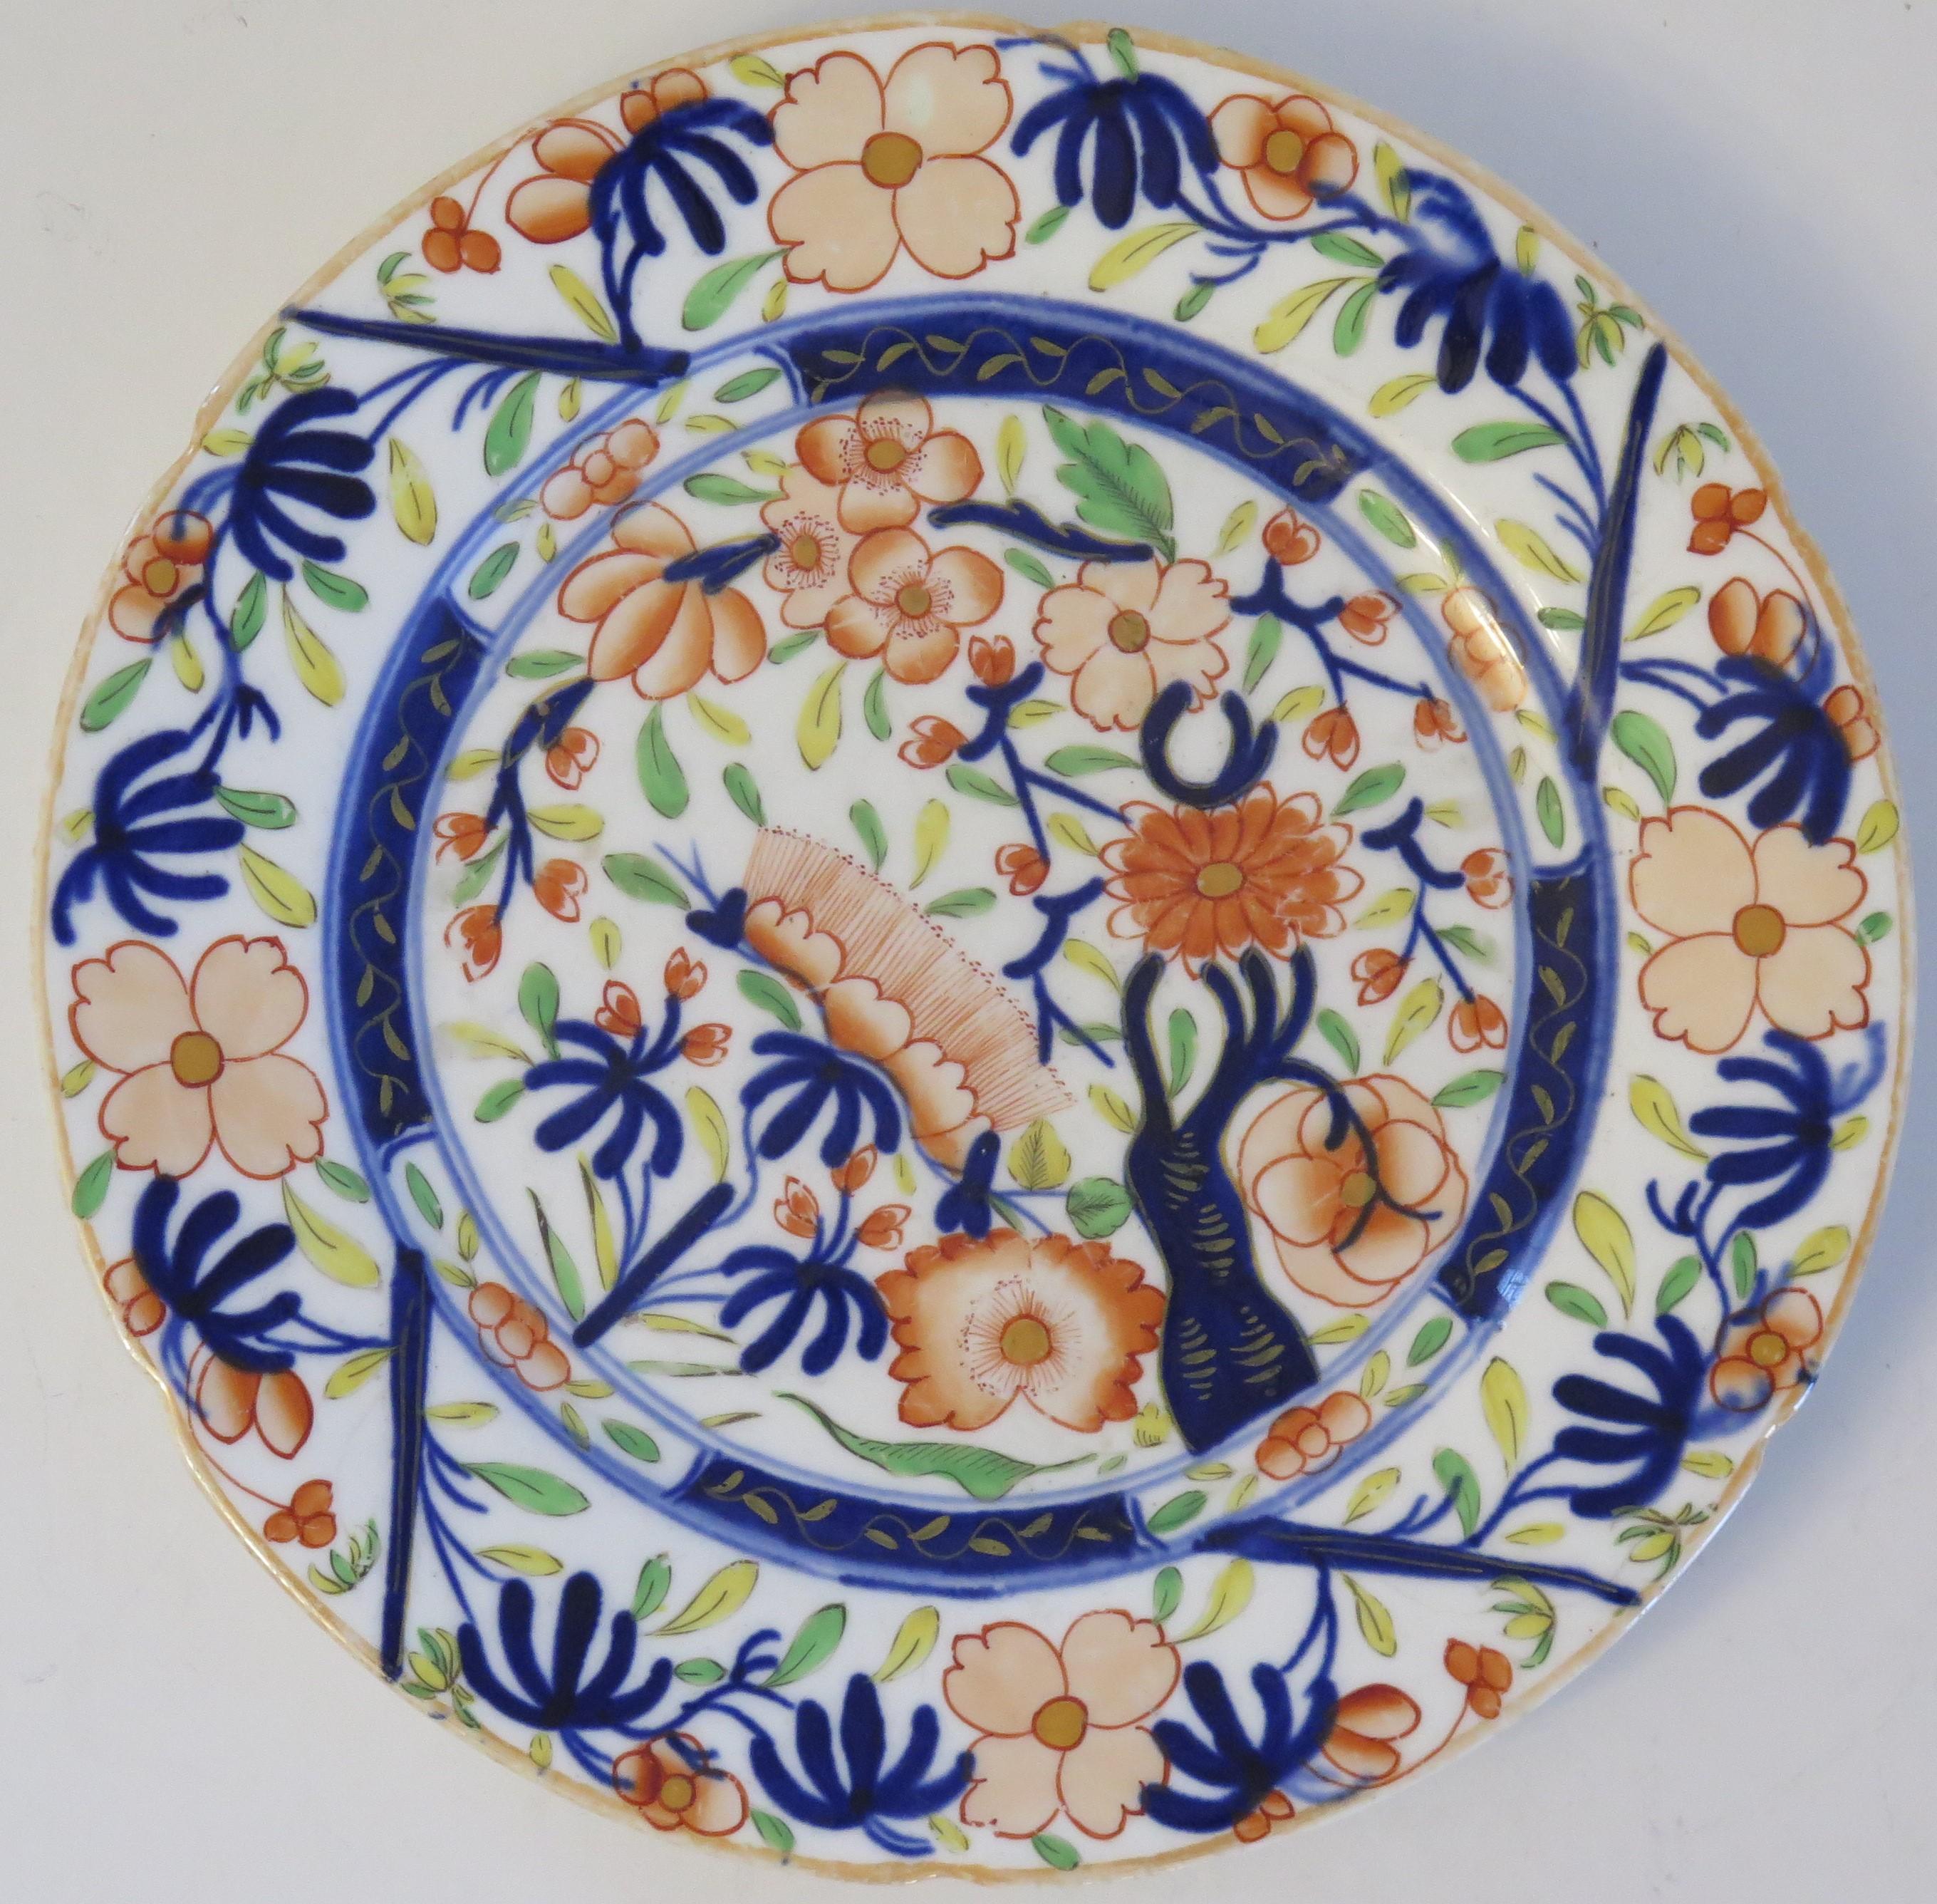 This is an early 19th century porcelain Plate or desert dish with a molded wavy edge to the rim, made by one of the quality Staffordshire, English potteries and dating from the George 111rd period, circa 1820 to 1830.

This piece is unmarked to